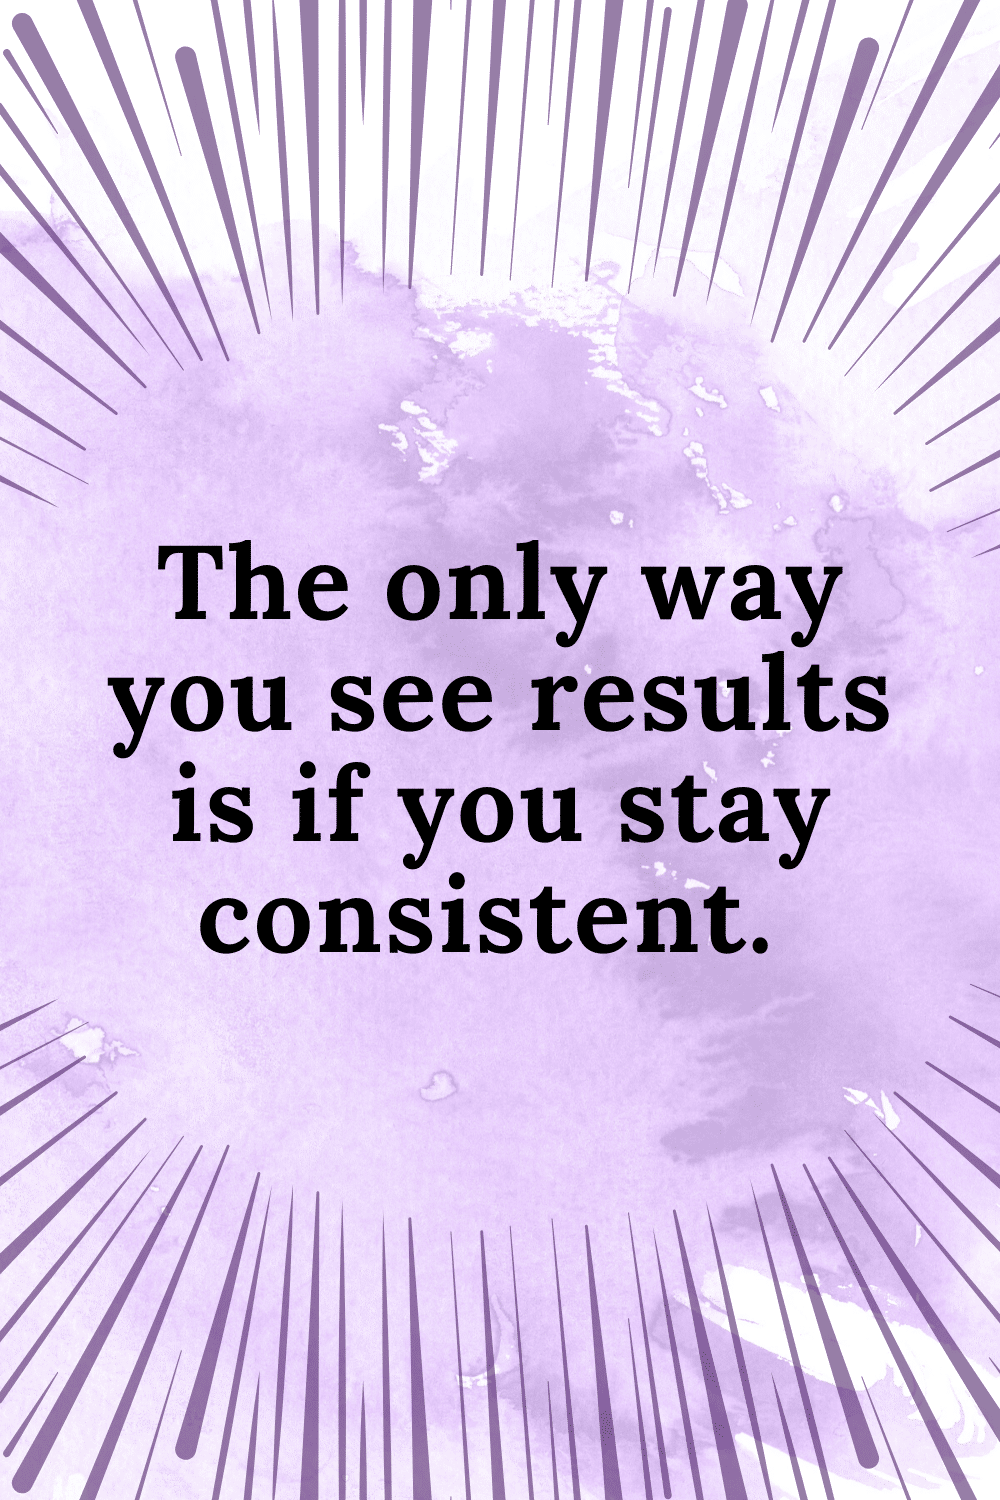 the only way you see results is if you stay consistent